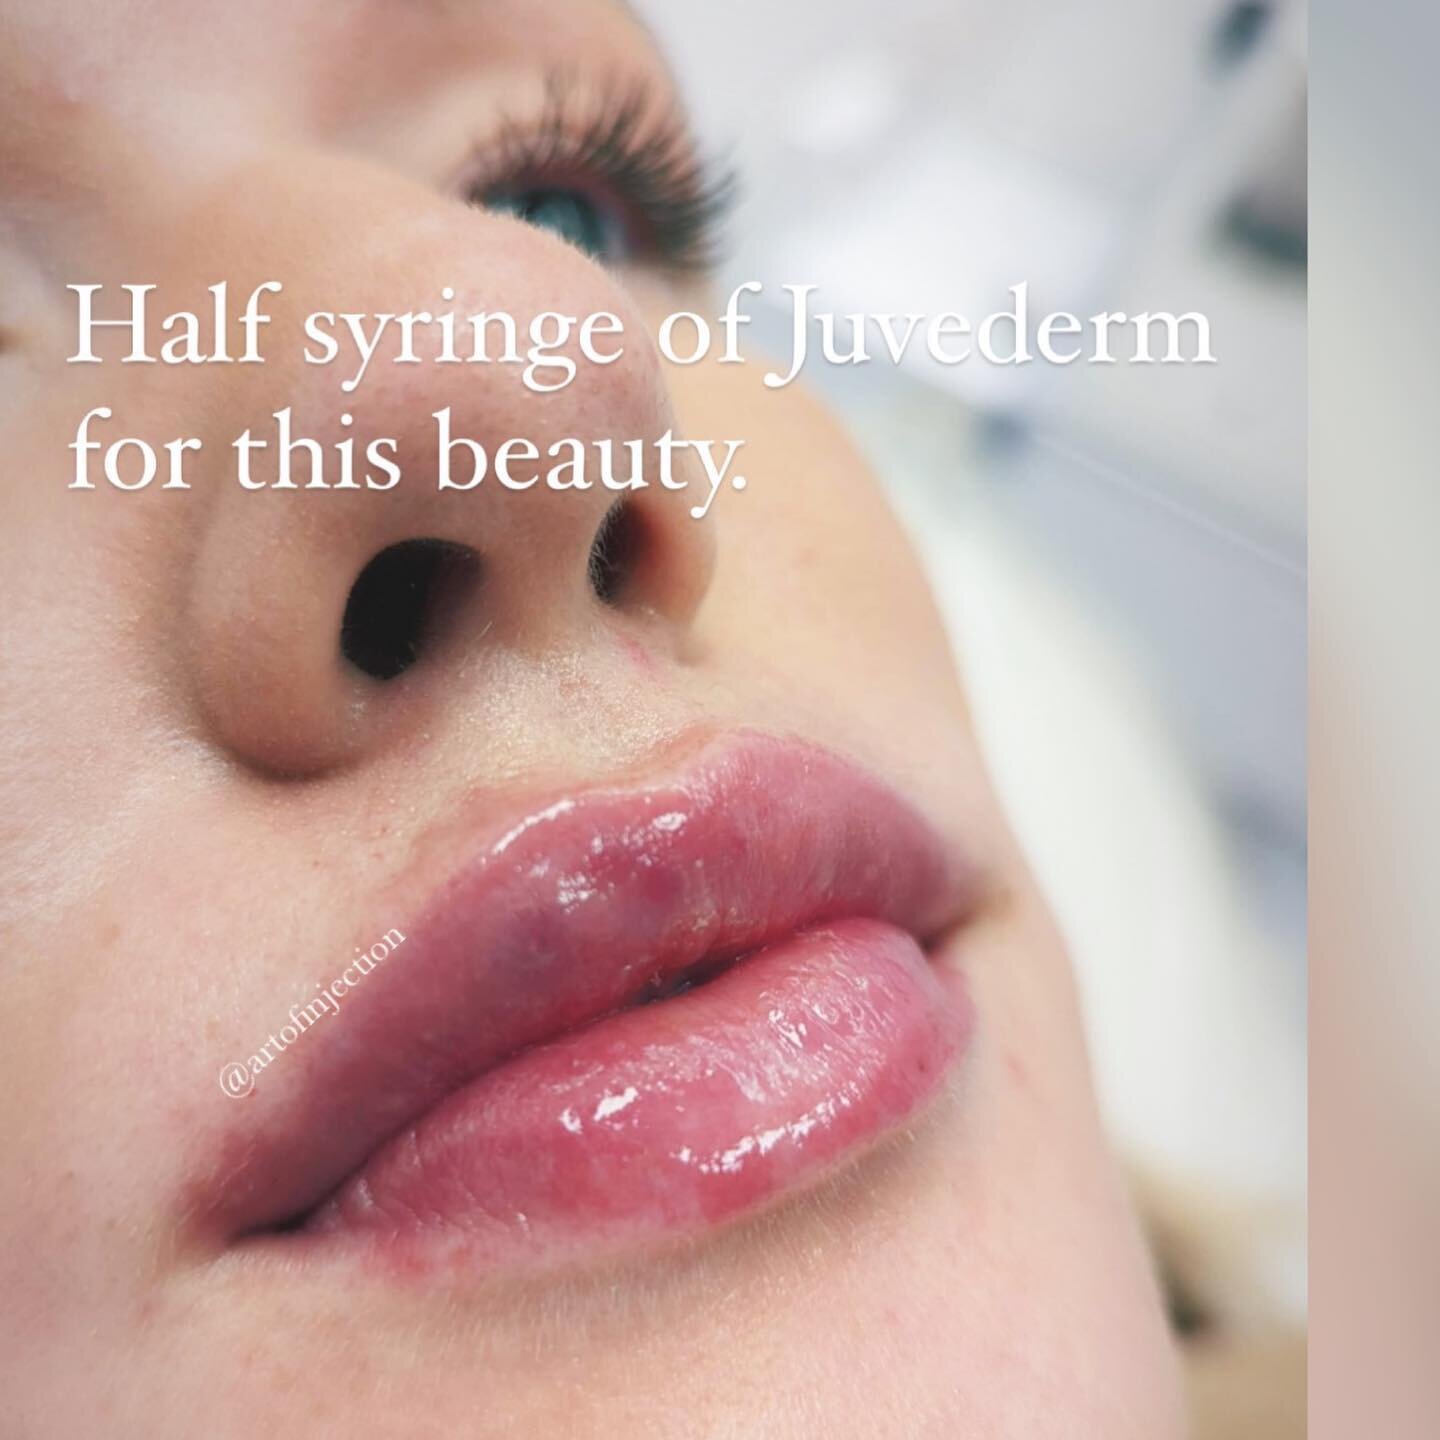 These lips were made for Kissing 💋
.
.
.

#lipfiller #juvederm #lipinjections #juvedermlips #restylane #cosmeticinjectables #juvedermultra #lipenhancement #facialaesthetics #kissablelips #galderma #lipaugmentation #cosmeticinjections #perfectpout #a